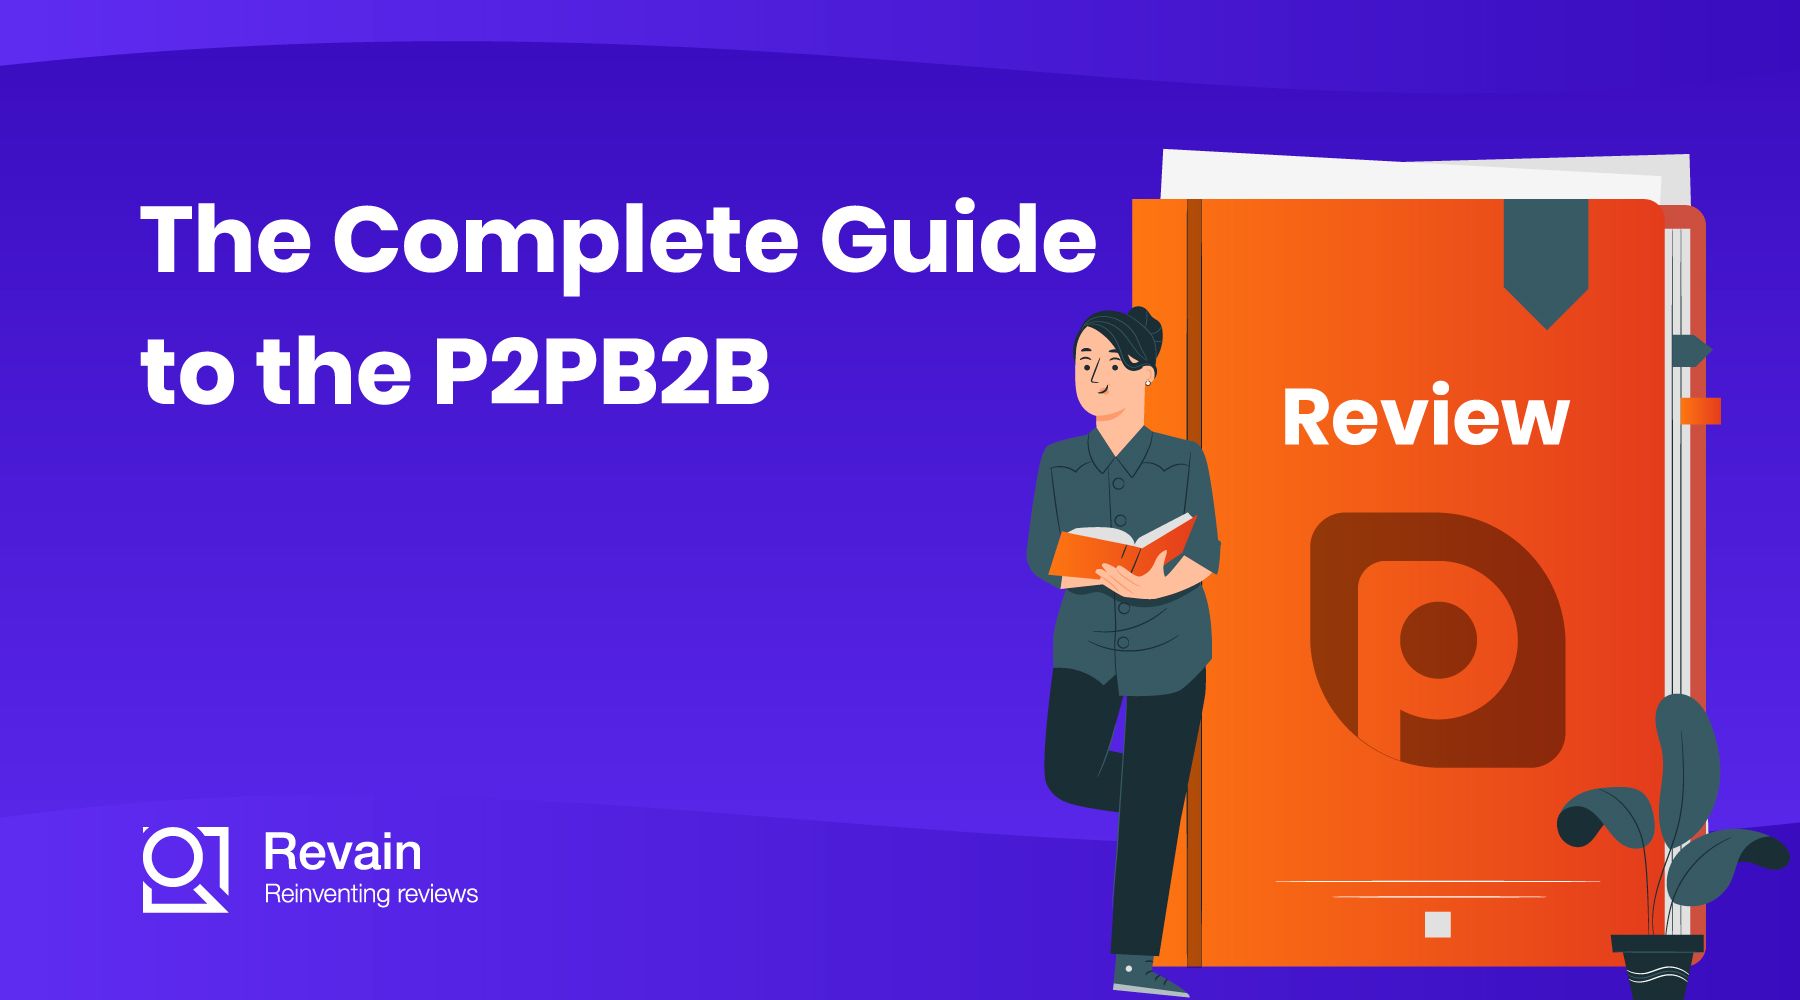 Article The Complete Guide to the P2PB2B Exchange